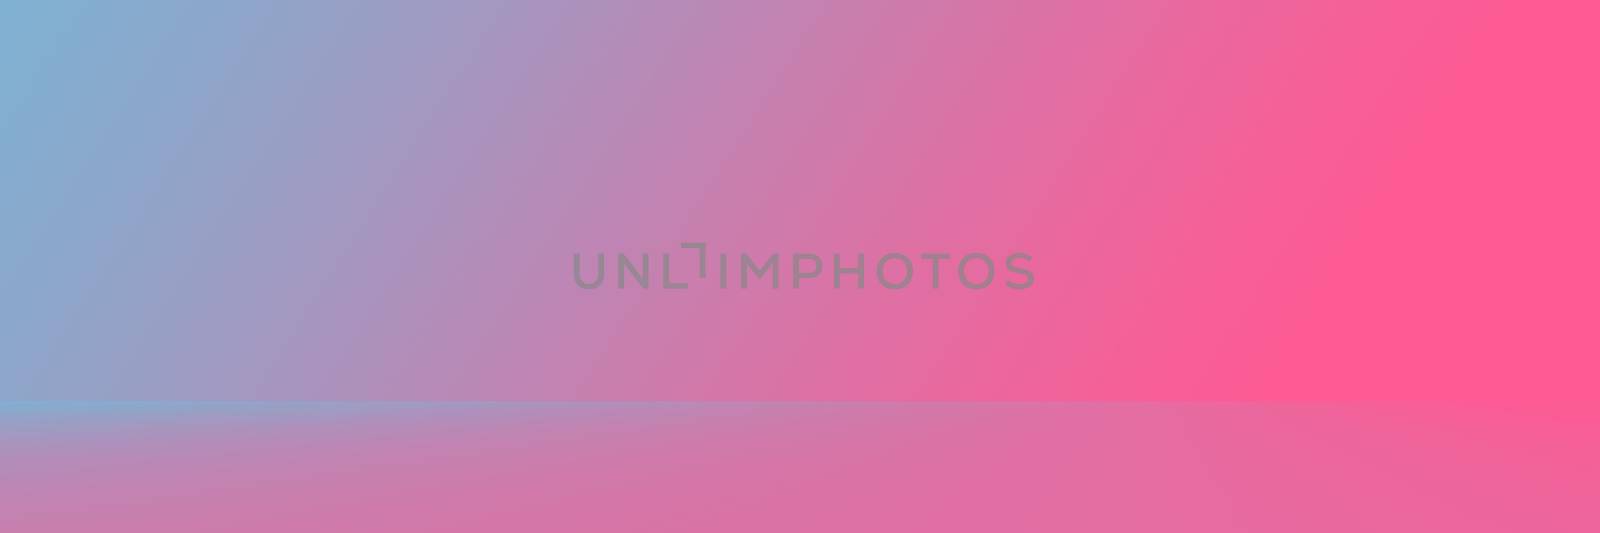 Studio Background - Abstract Bright luxury Pink Gradient horizontal studio room wall background for display product ad website template. by Benzoix